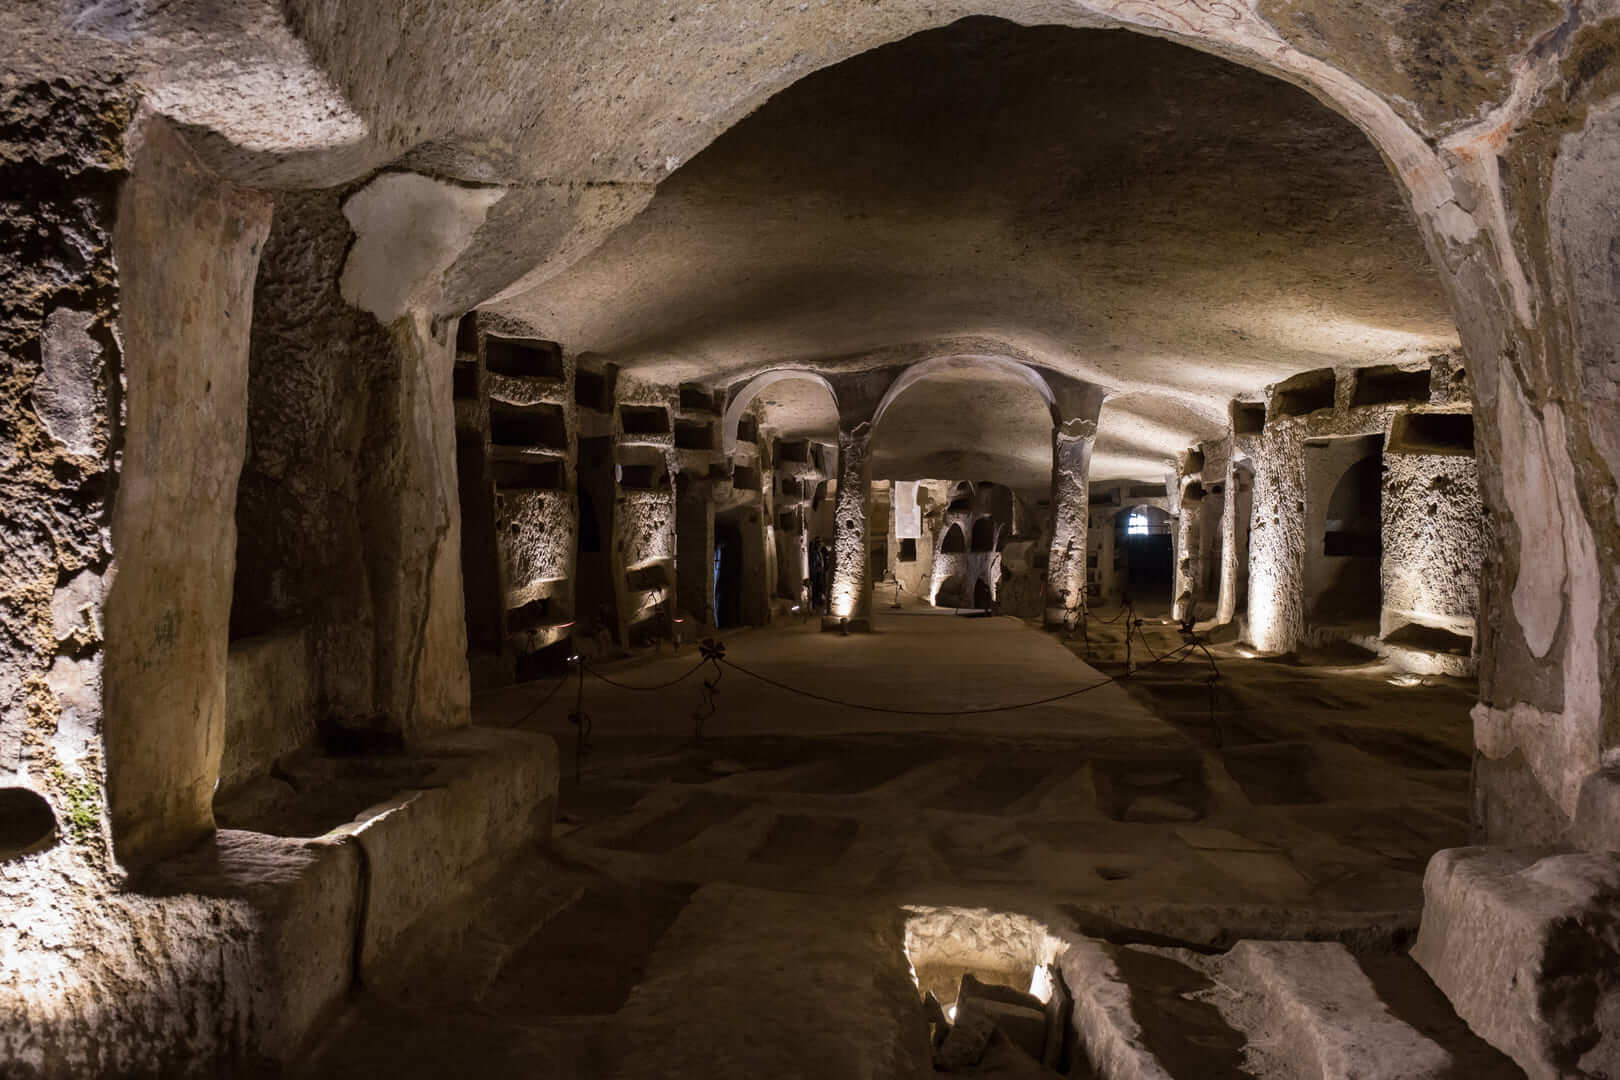 The Catacombs of San Gennaro
